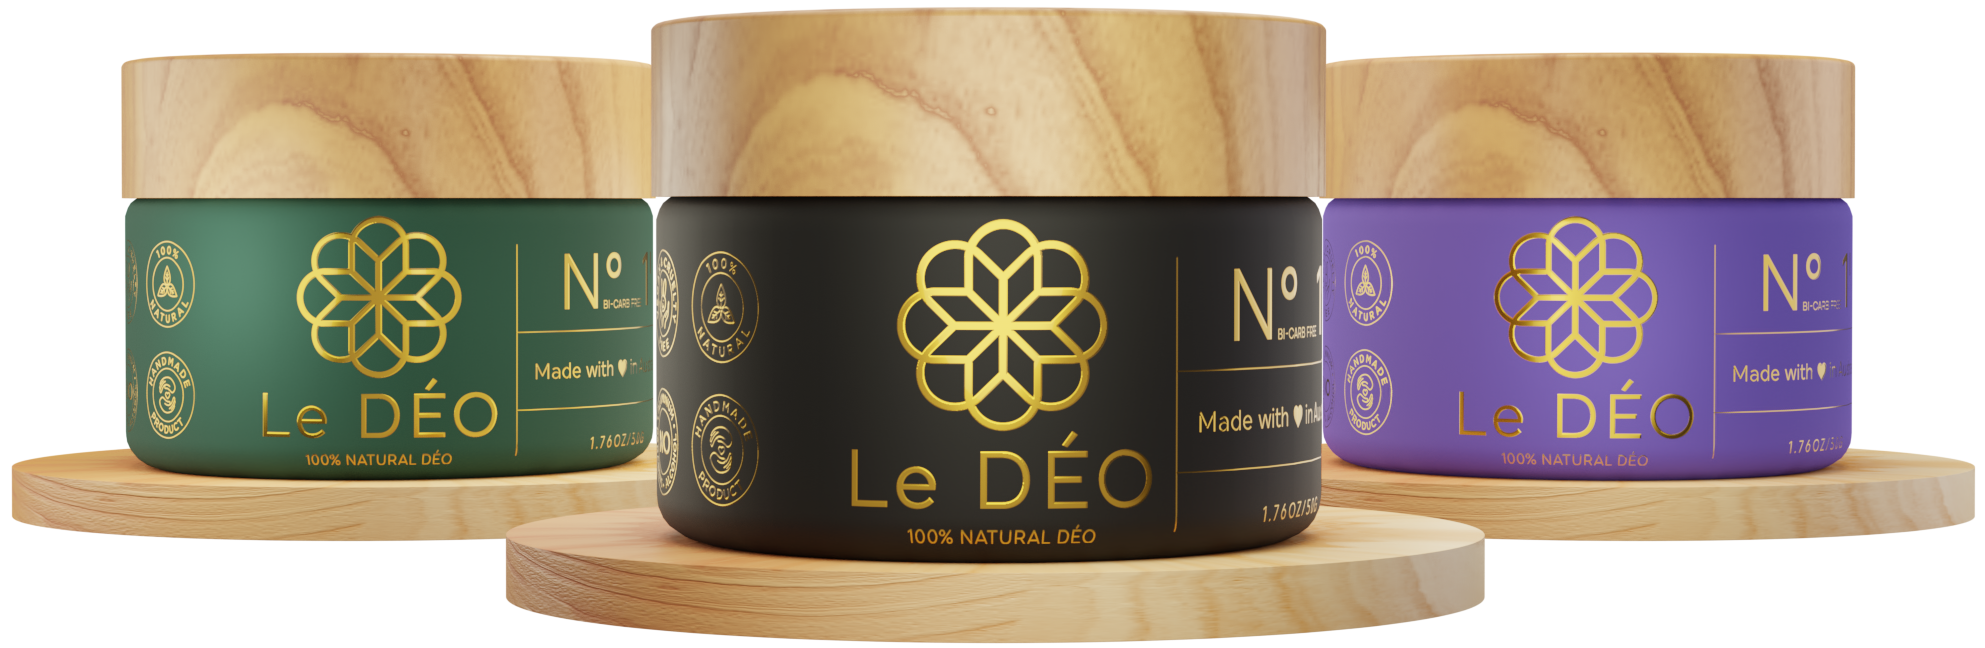 6 REASONS WHY YOU NEED TO SWITCH TO LE DÉO